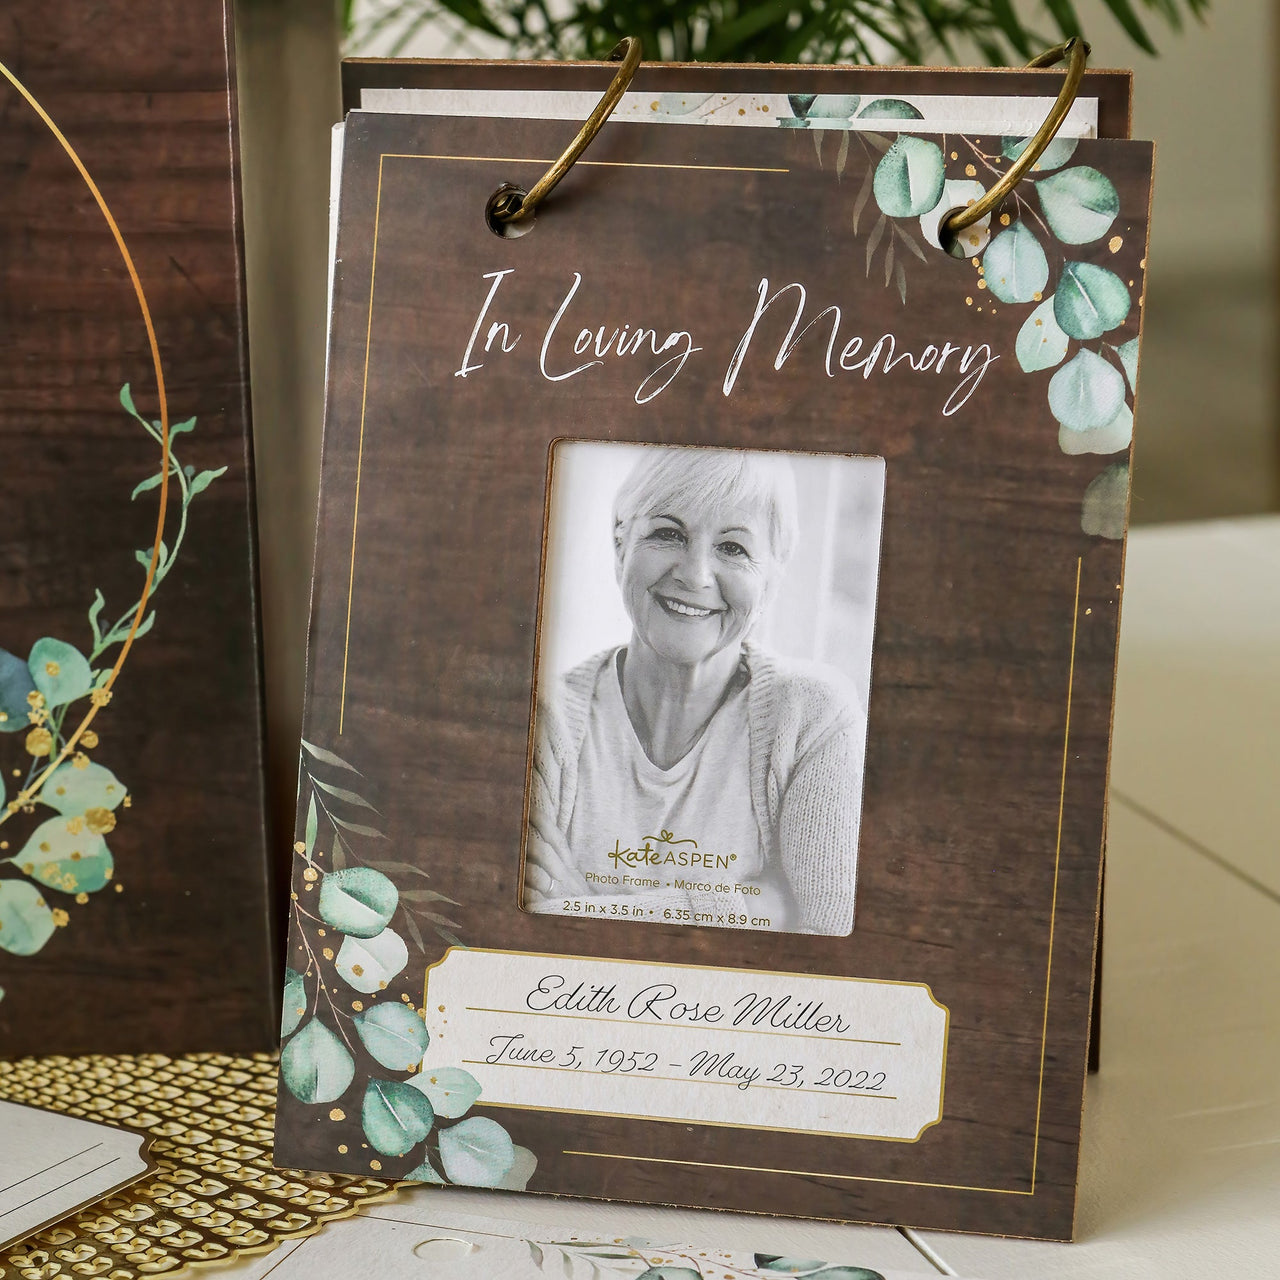 Celebration of Life Memory Funeral Guest Book and Box for Memorial Service  2Kate Aspen